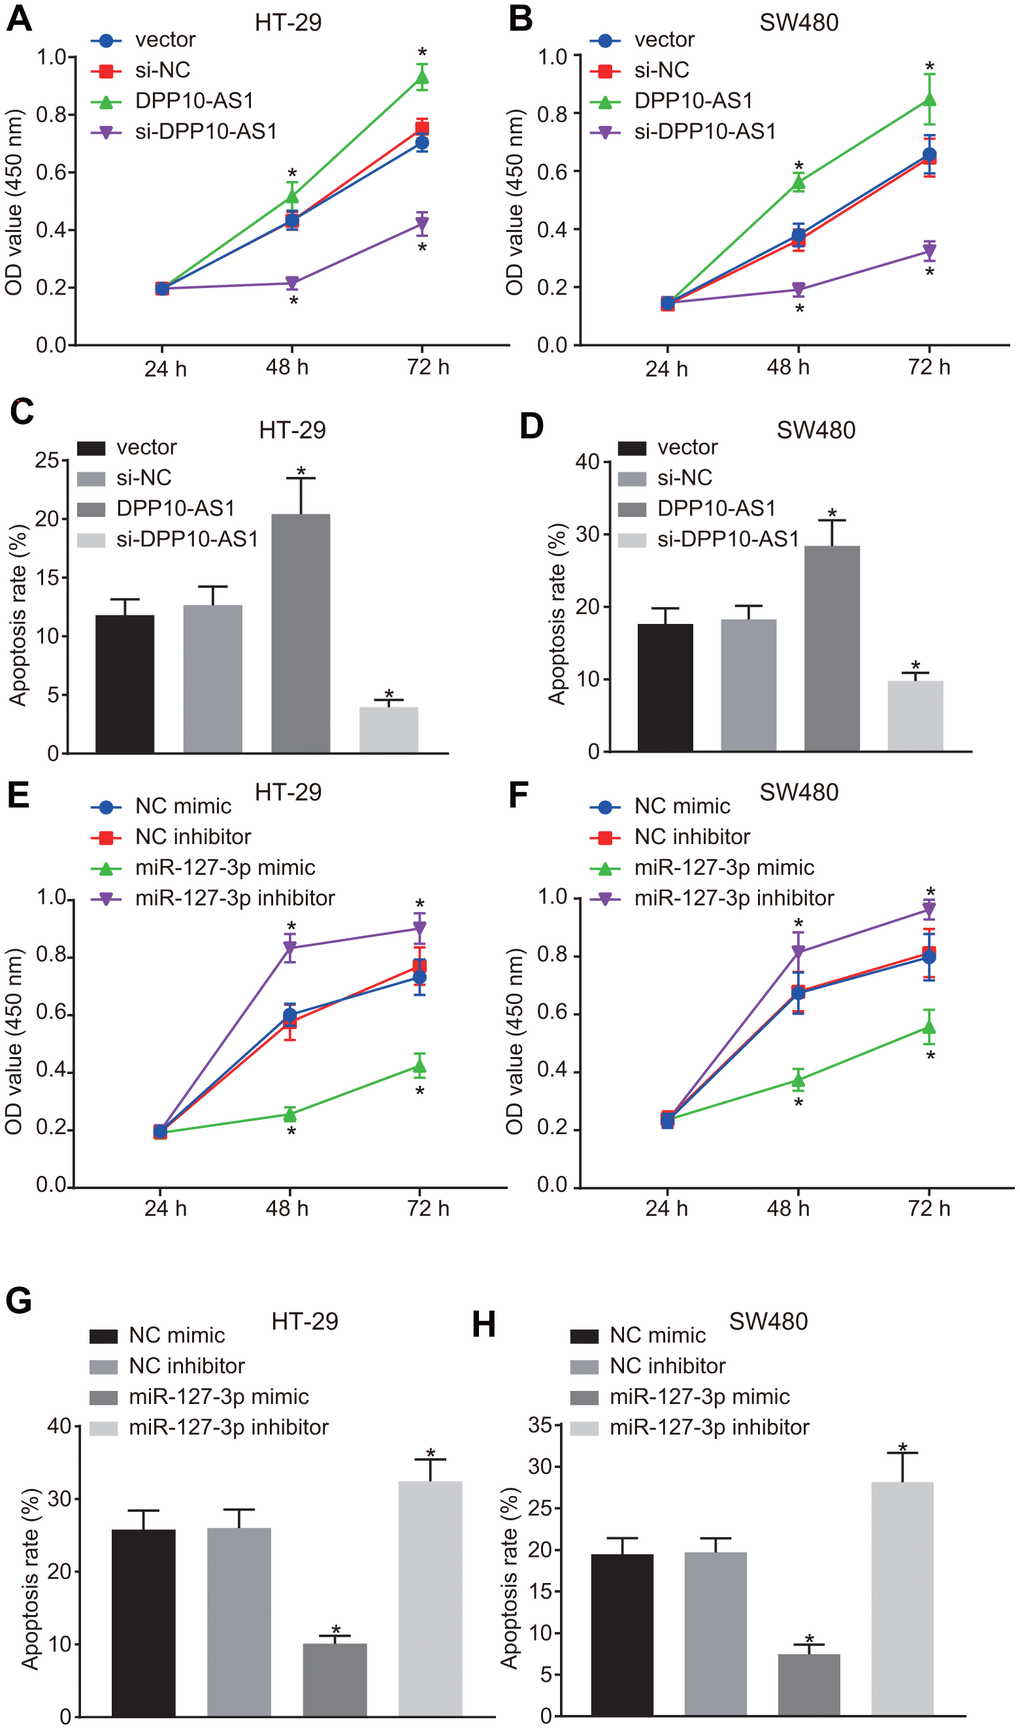 Upregulation of DPP10-AS1 and downregulation of miR-127-3p suppress the proliferation and stimulate apoptosis of CCSCs. (A, B) cell proliferation detected by CCK-8 assay after DPP10-AS1 expression was altered; (C, D) cell apoptosis detected by flow cytometry after DPP10-AS1 expression was altered; (E, F) cell proliferation detected by CCK-8 assay after miR-127-3p expression was altered; (G, H) cell apoptosis measured by flow cytometry after miR-127-3p expression was altered. *, p vs. vector and si-NC, or NC mimic and NC inhibitor. The measurement data were expressed as mean ± standard deviation. The data among multiple groups were analyzed by two-way ANOVA followed by a Tukey’s post hoc test. The experiment was repeated three times. DPP10-AS1, cells transfected with DPP10-AS1 plasmid; si-DPP10-AS1, cells transfected with si-DPP10-AS1; si-NC, cells transfected with si-negative control plasmid; miR-127-3p mimic, cells transfected with miR-127-3p mimic plasmid; NC mimic, cells transfected with negative control mimic plasmid.